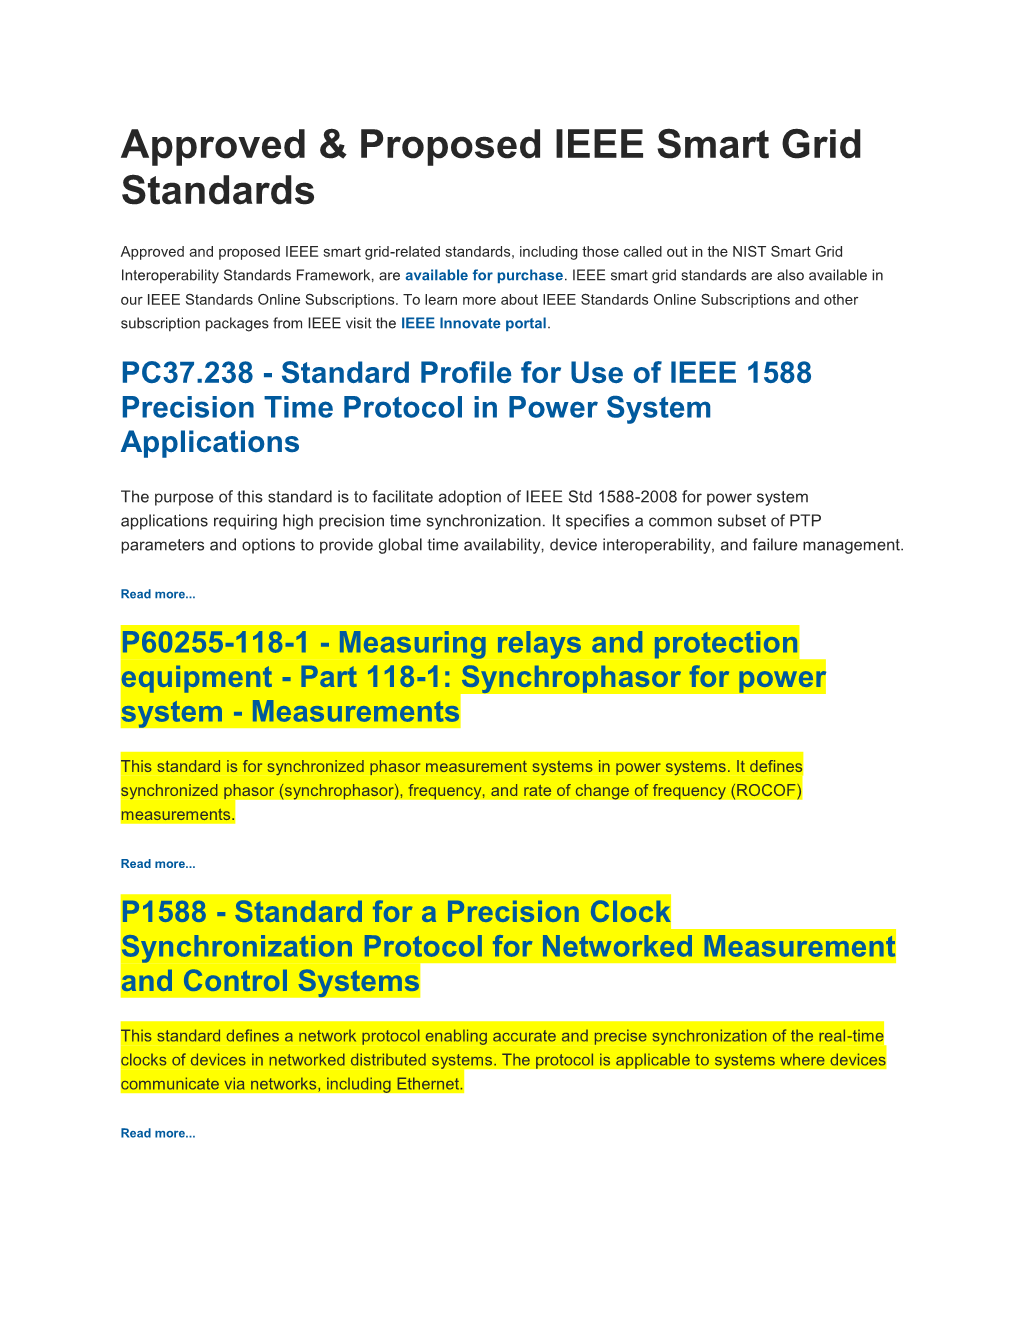 Approved & Proposed IEEE Smart Grid Standards